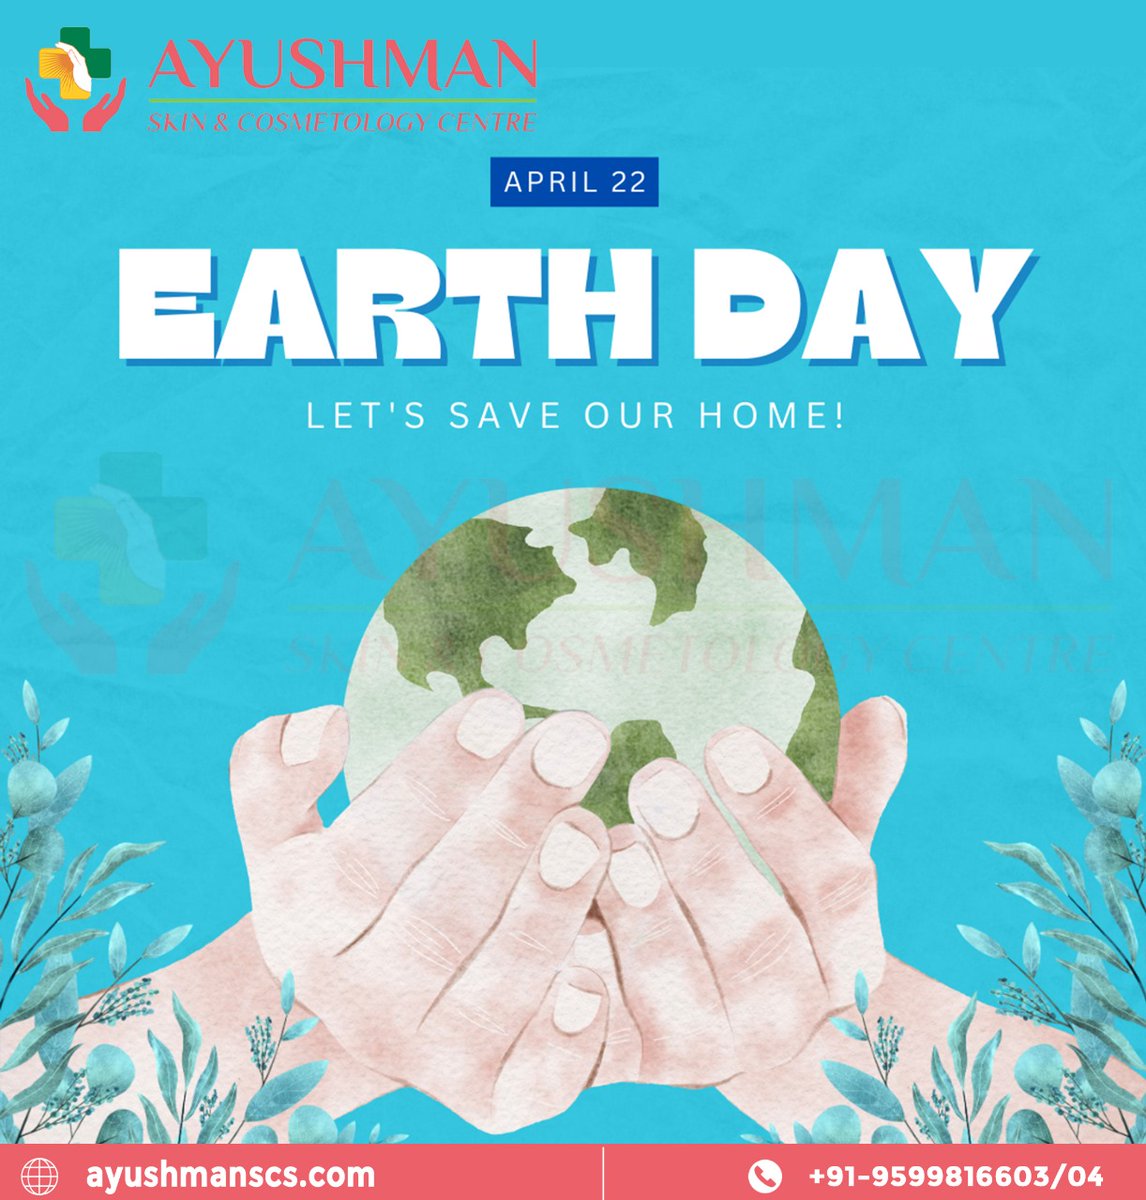 Let's plant the seeds of a greener future. Happy Earth Day!
.
.
.
.
Contact Us Today!
Call-9599816603/04
Visit- ayushmanscs.com
#worldearthday #happy #earth #day #earthday2024 #savetheearth #earthpic #pollutionfree #stoppollution #delhi #ayushmancentreofexcellence